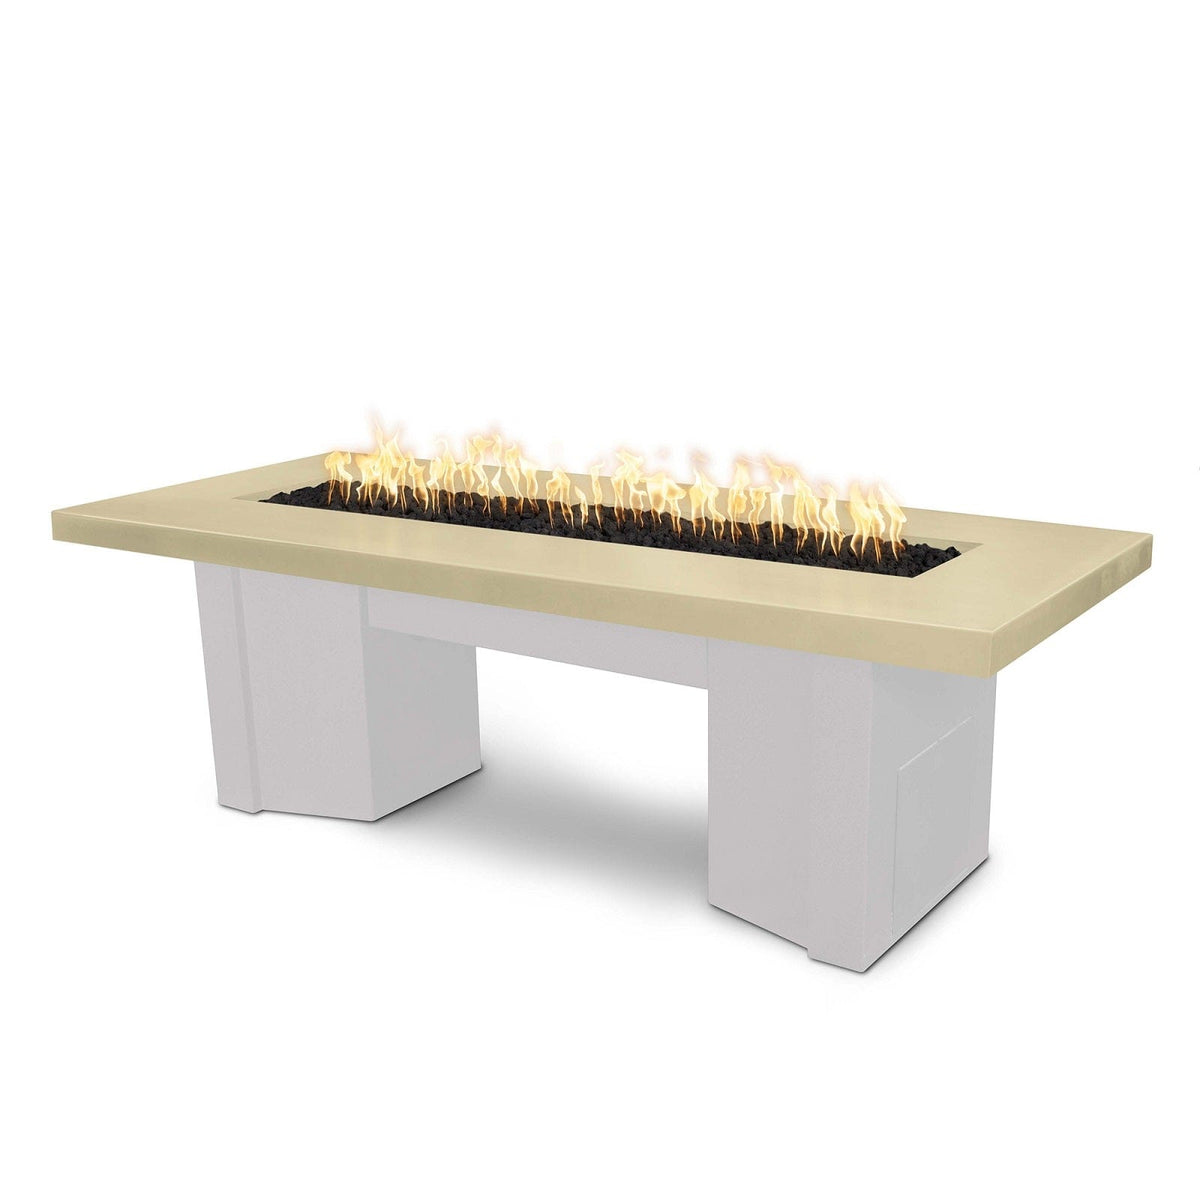 The Outdoor Plus Fire Features Vanilla (-VAN) / White Powder Coated Steel (-WHT) The Outdoor Plus 78&quot; Alameda Fire Table Smooth Concrete in Natural Gas - Flame Sense System with Push Button Spark Igniter / OPT-ALMGFRC78FSEN-NG